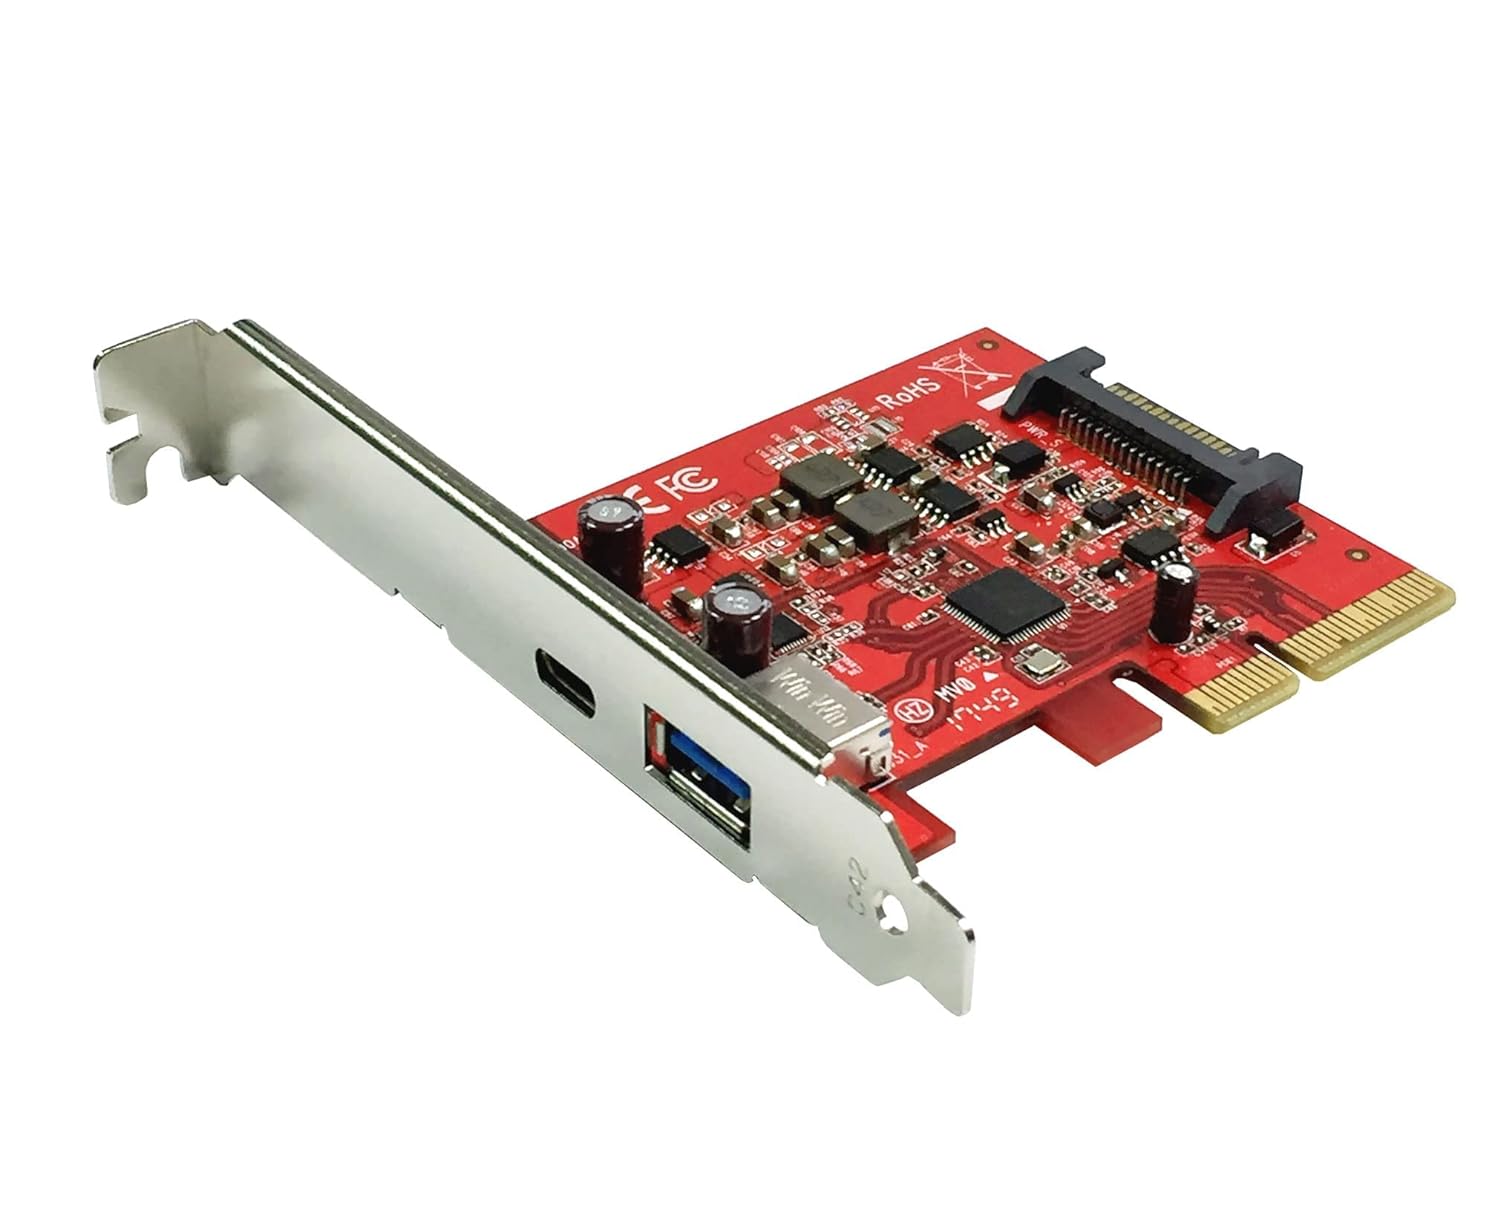 Ableconn PU31-AC-2 USB 3.1 Gen 2 (10 Gbps) Type-C & Type-A PCI Express (PCIe) x4 Host Adapter Card (ASMedia ASM2142 Chipset)